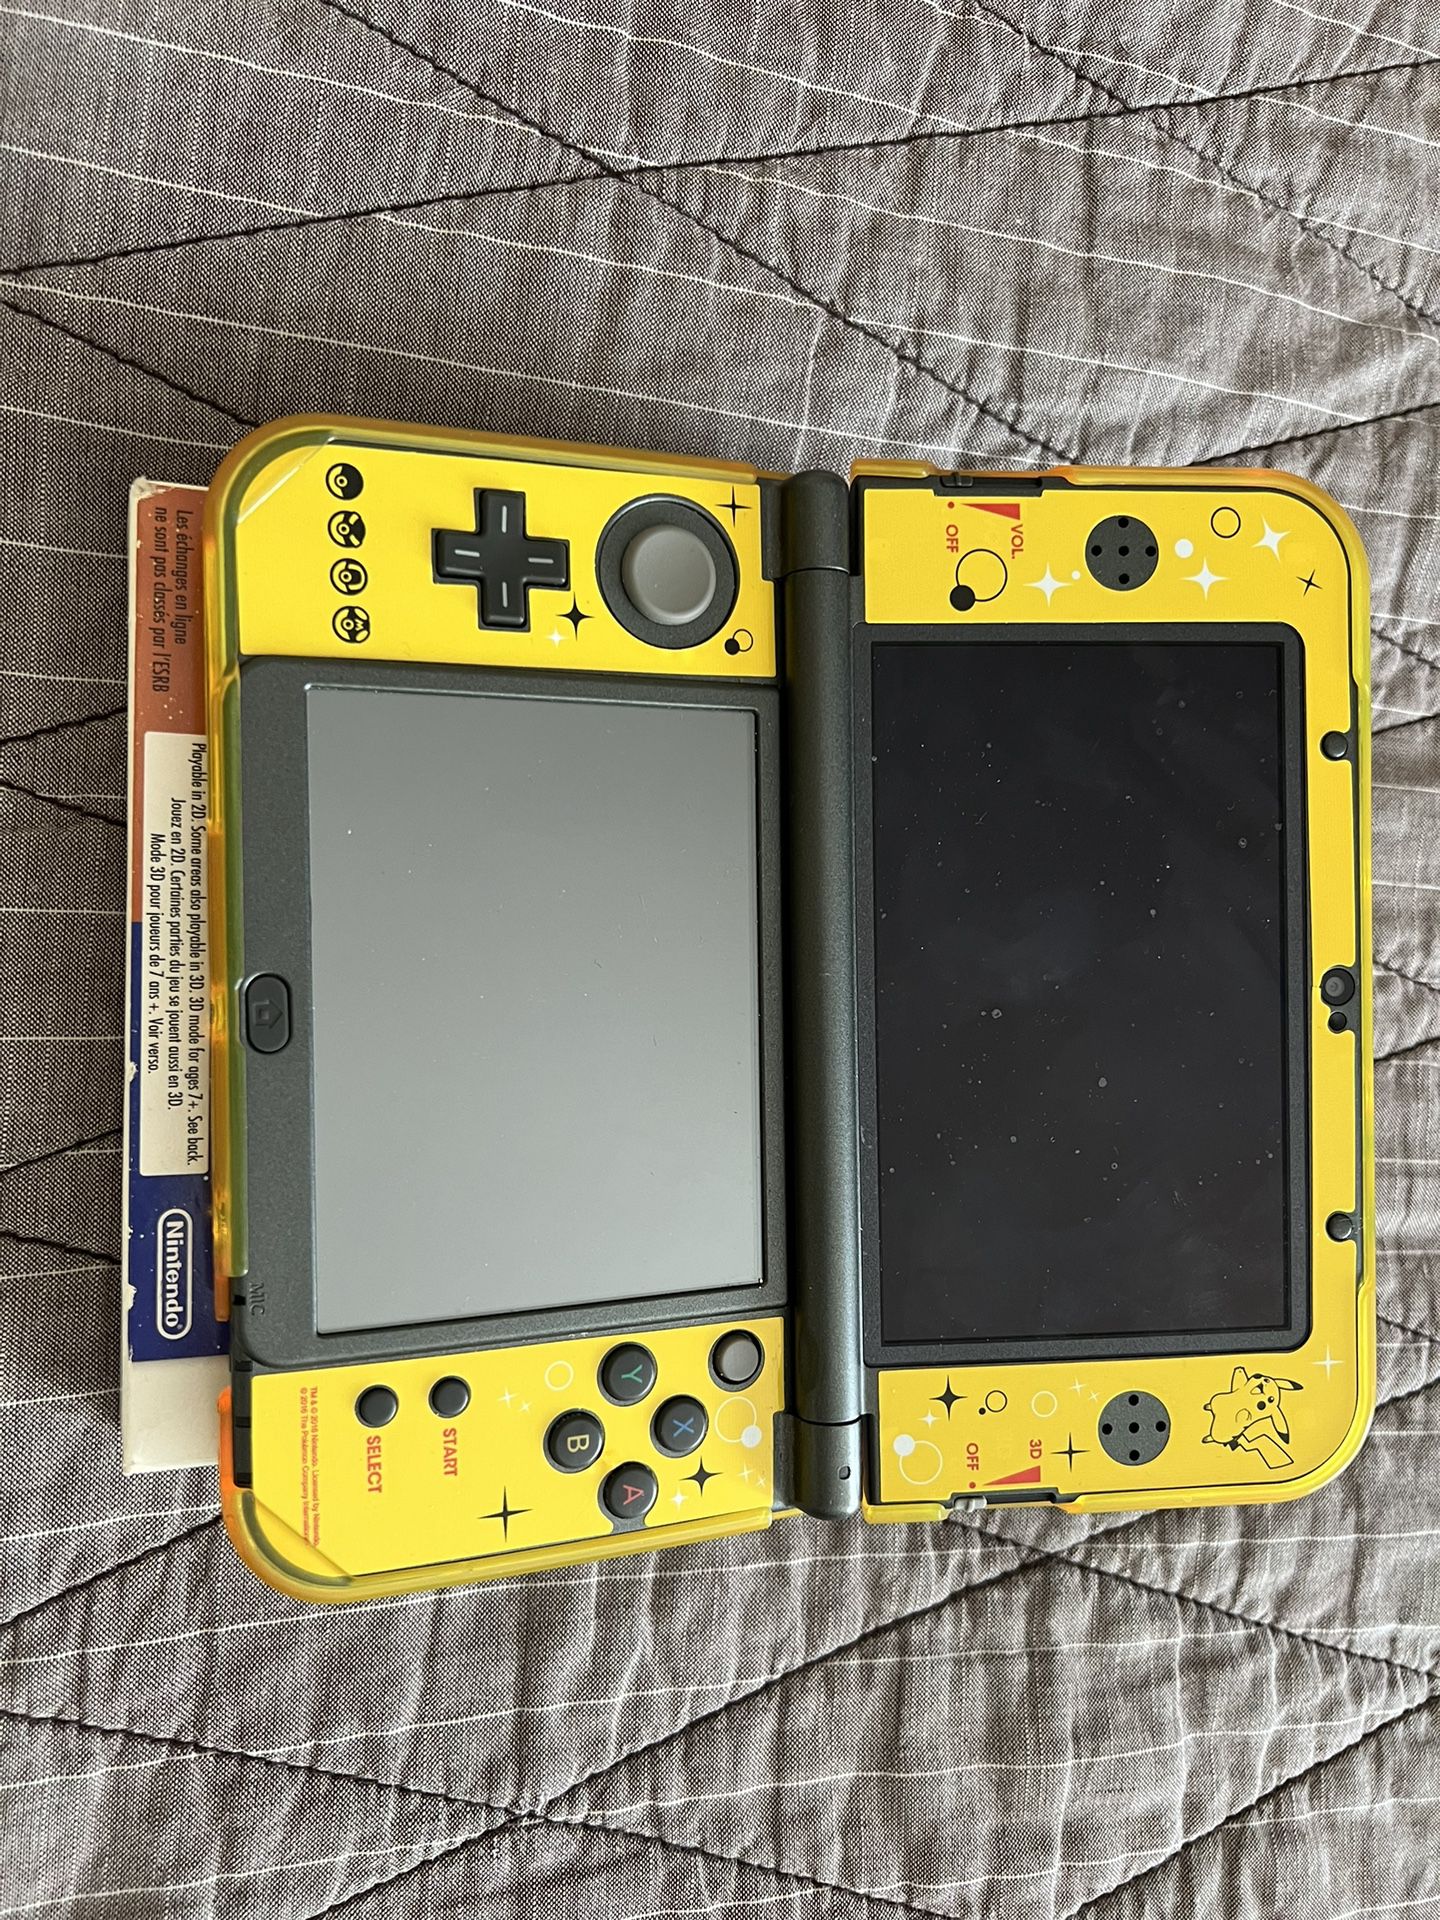 Nintendo 3ds XL With Pikachu Stickers And Case. Used Like New. Includes Pokemon Sun And Moon Games And Pikachu Game Holder 